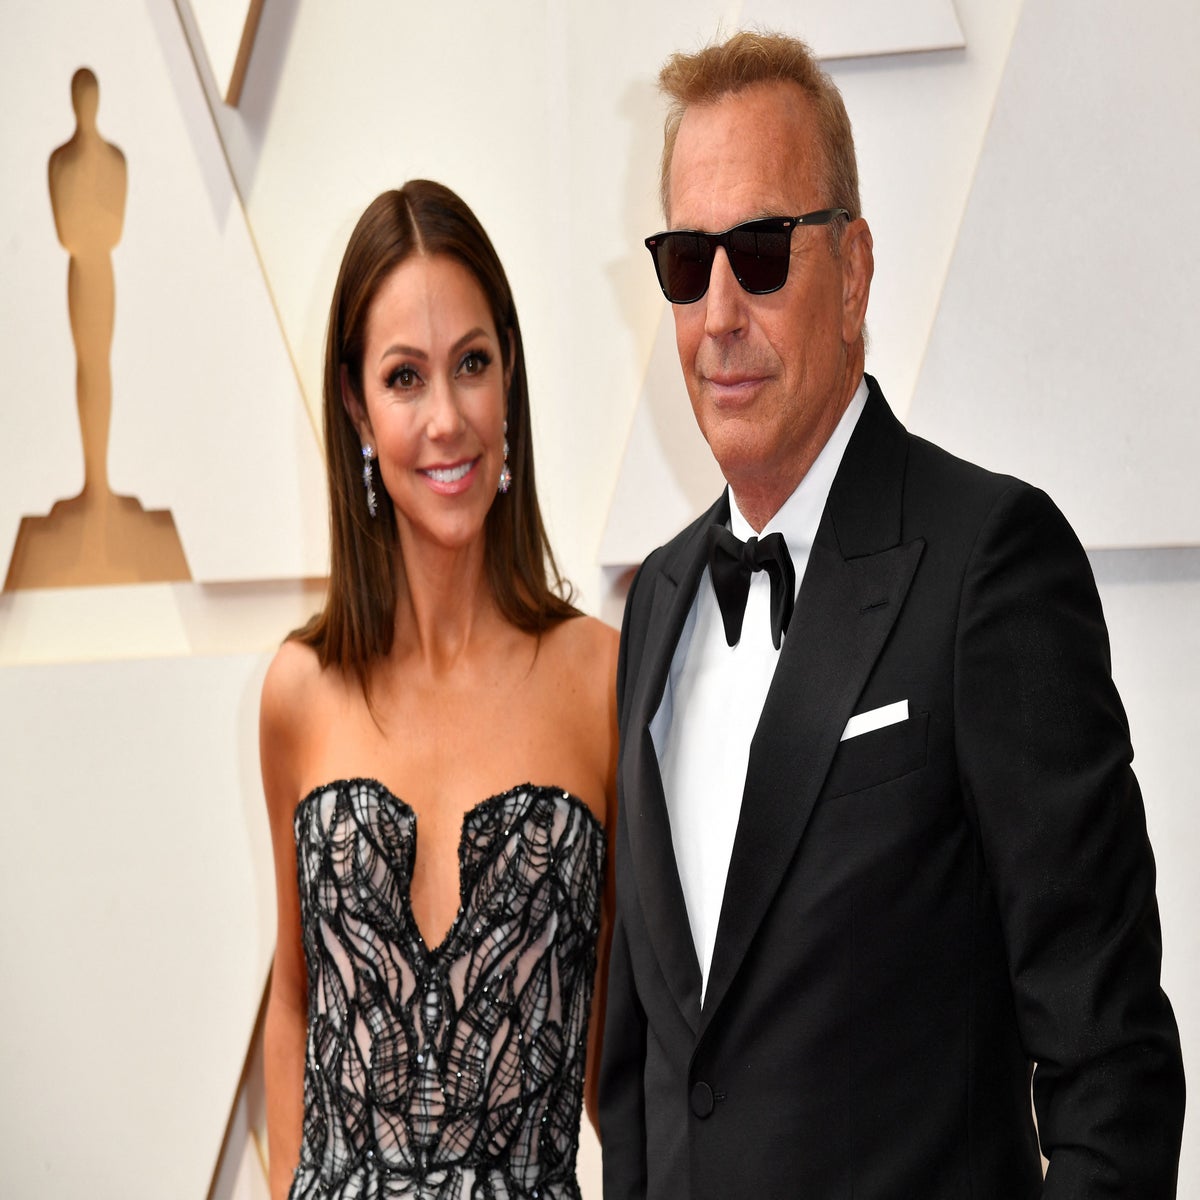 Kevin Costner Sex Videos - Kevin Costner's wife Christine files for divorce after 18 years of marriage  | The Independent